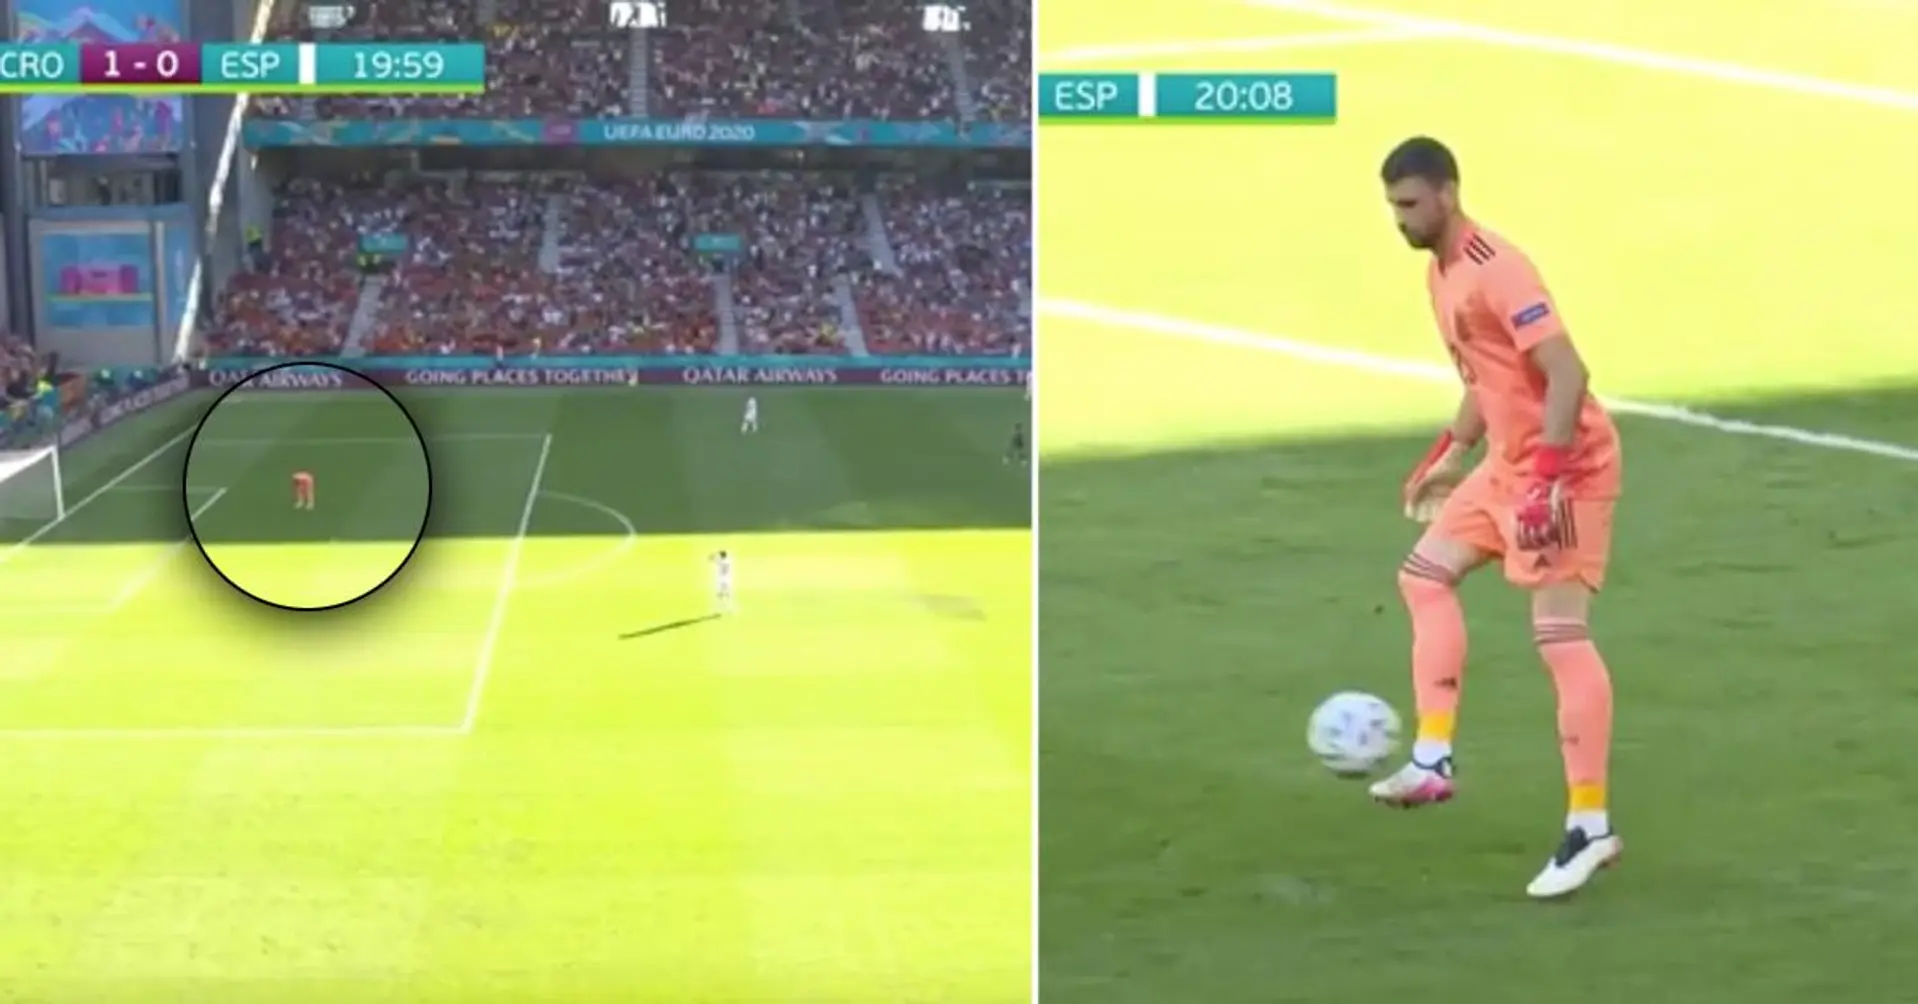 'De Gea would NEVER': Man United fans in shock as Spain goalkeeper Simon allows in ridiculous own goal